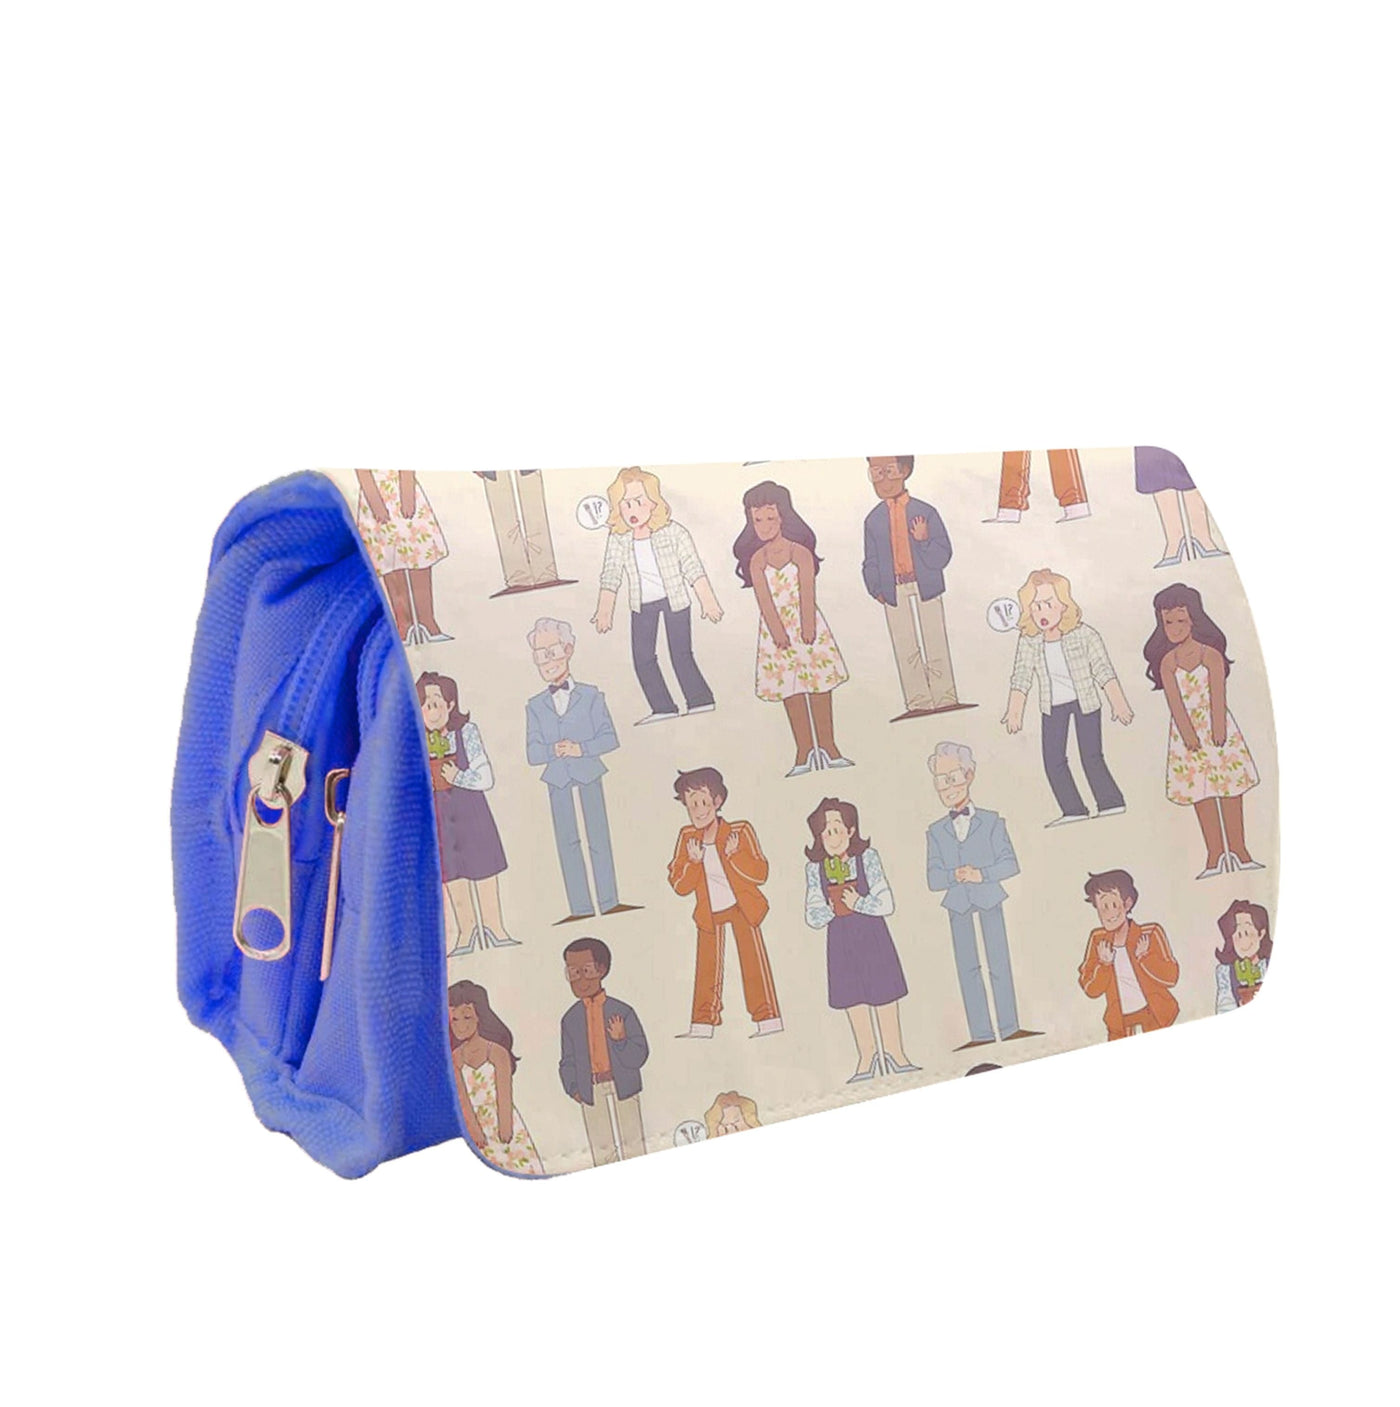 The Good Place Characters Pencil Case